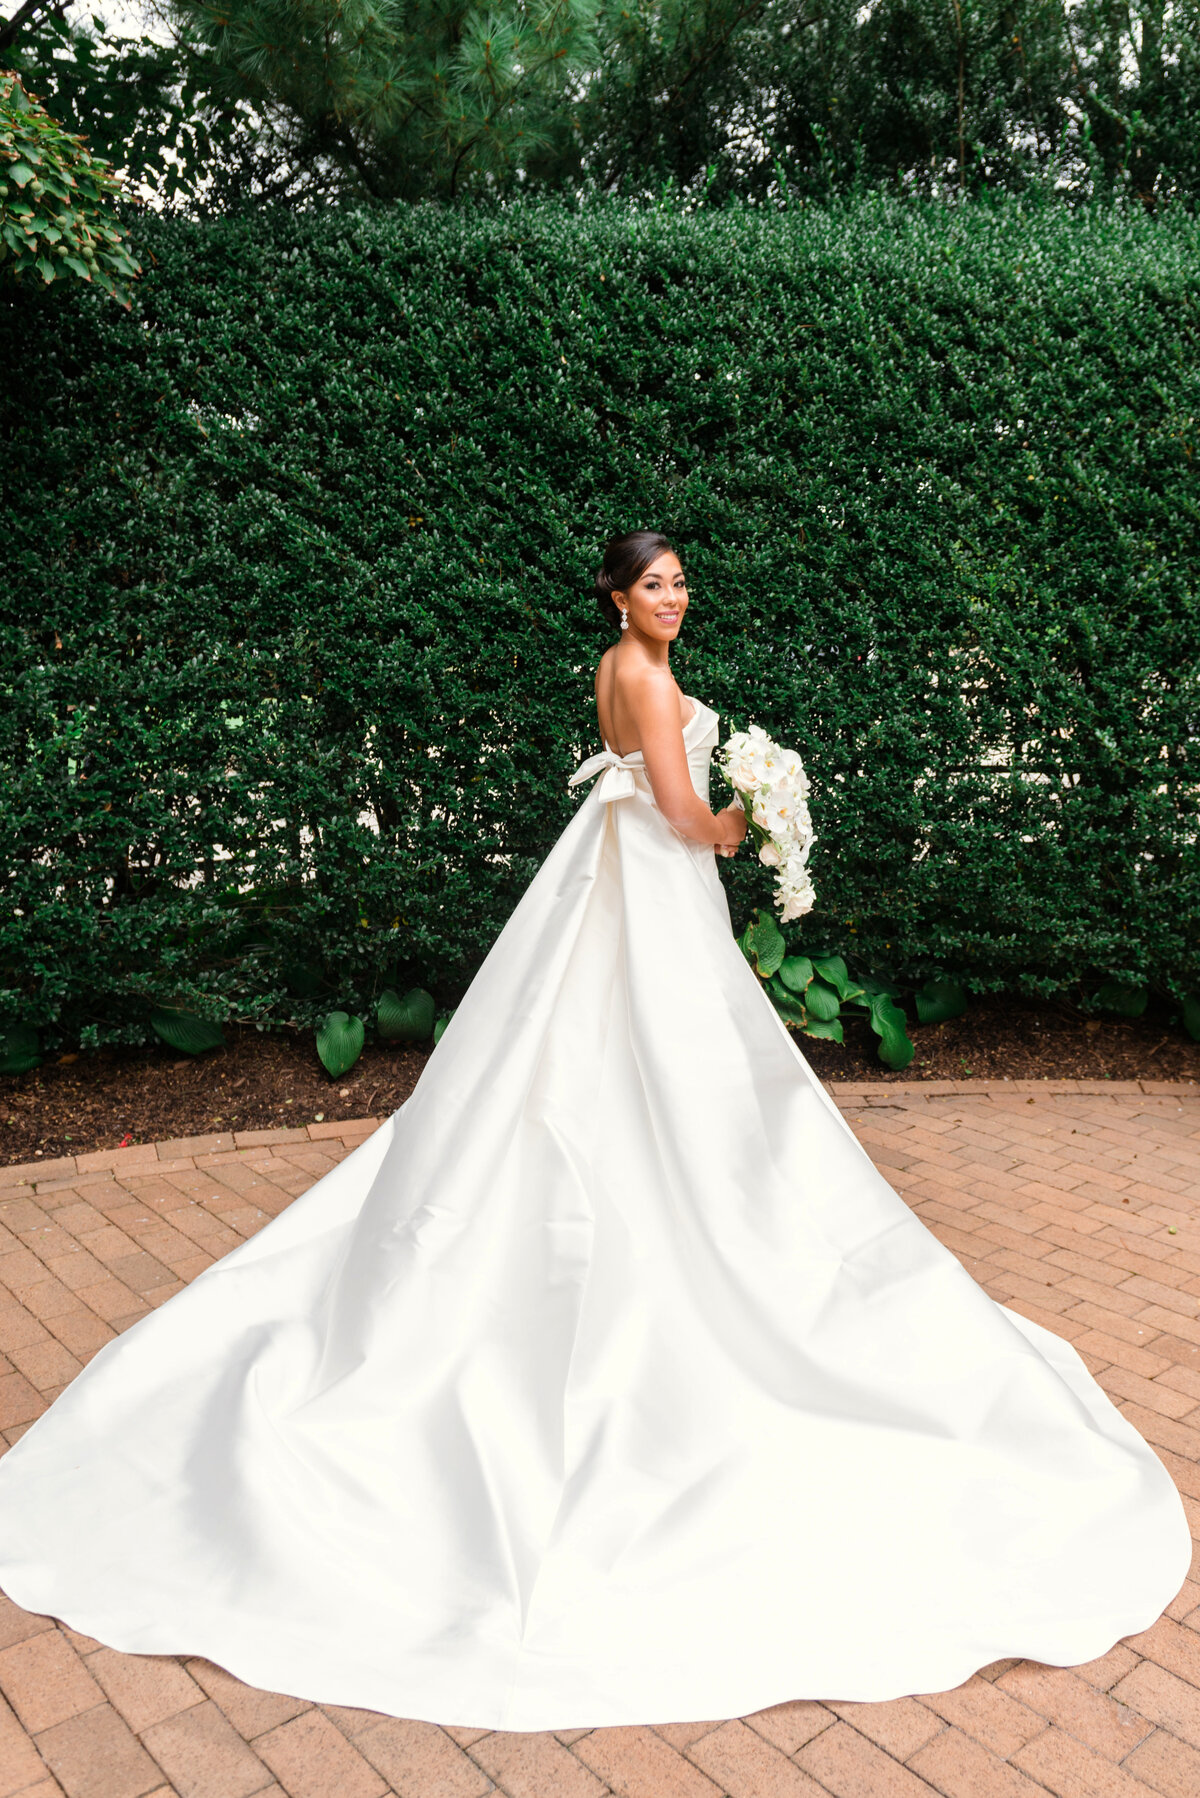 wedding photo of bride in her bridal gown outdoors at The Garden City Hotel